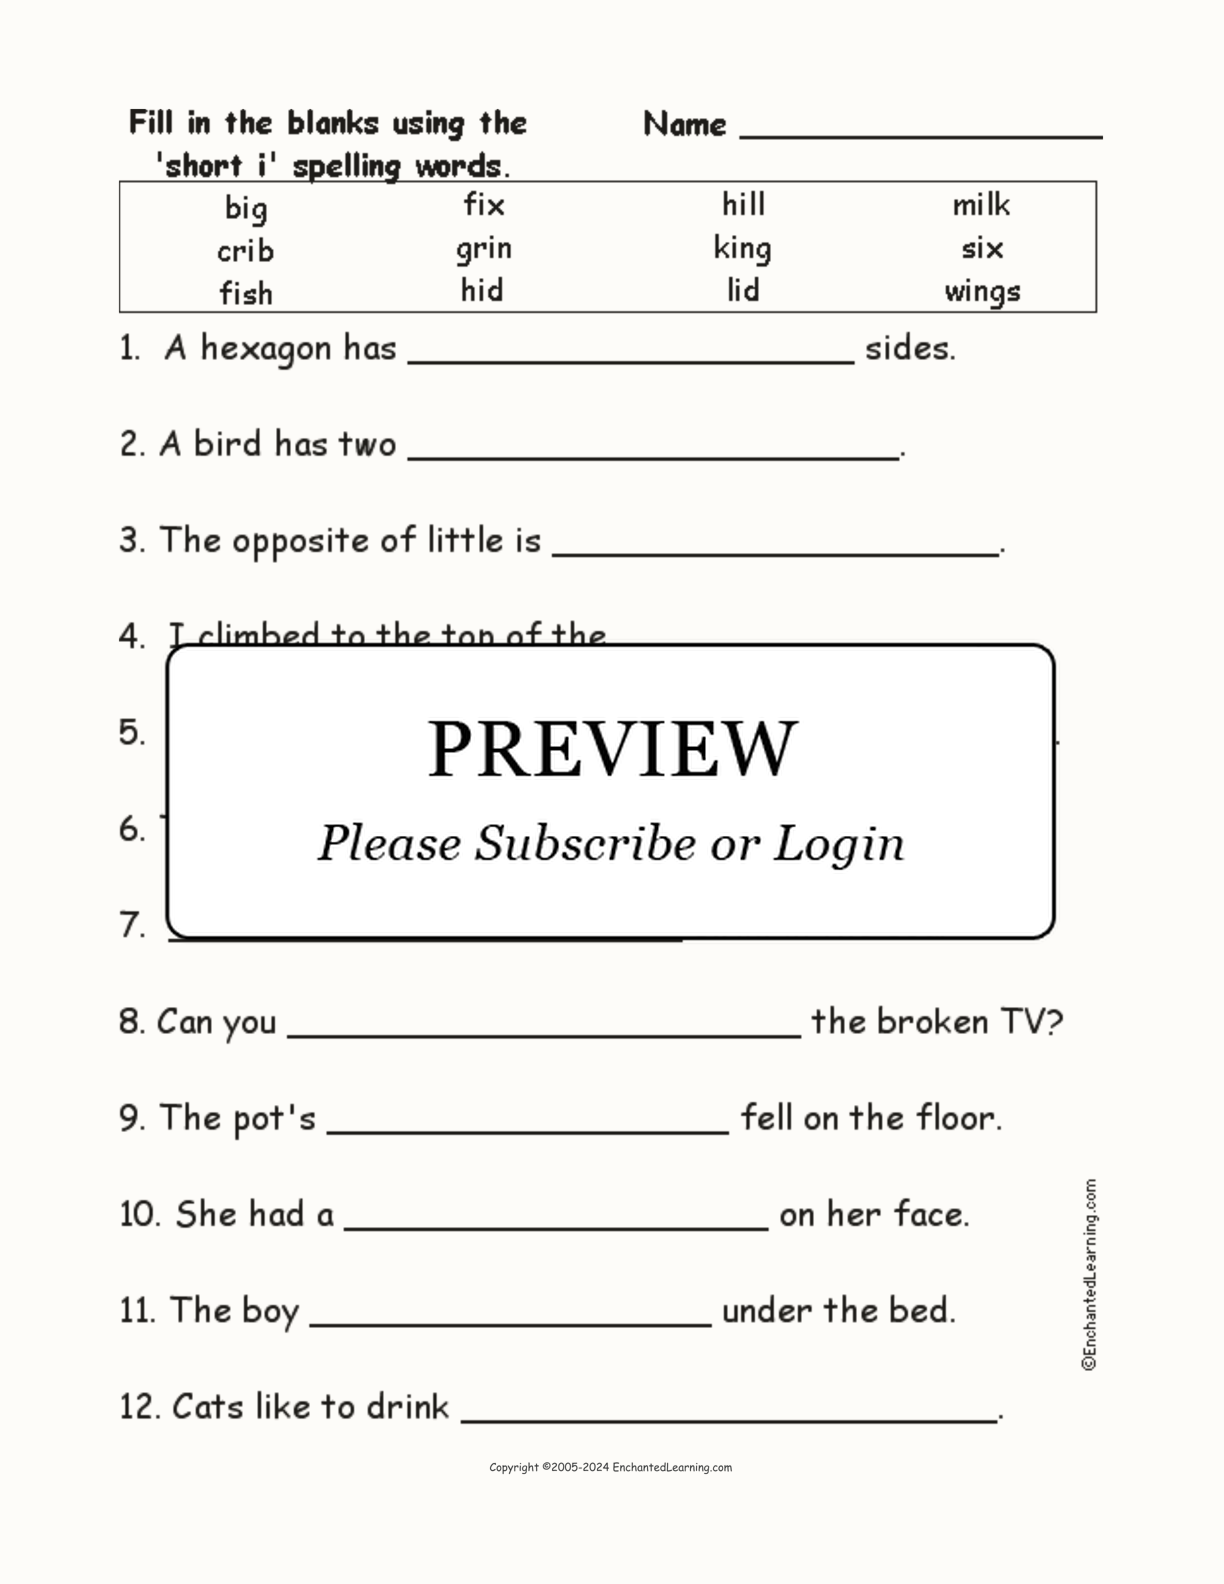 Short I: Spelling Word Questions interactive worksheet page 1